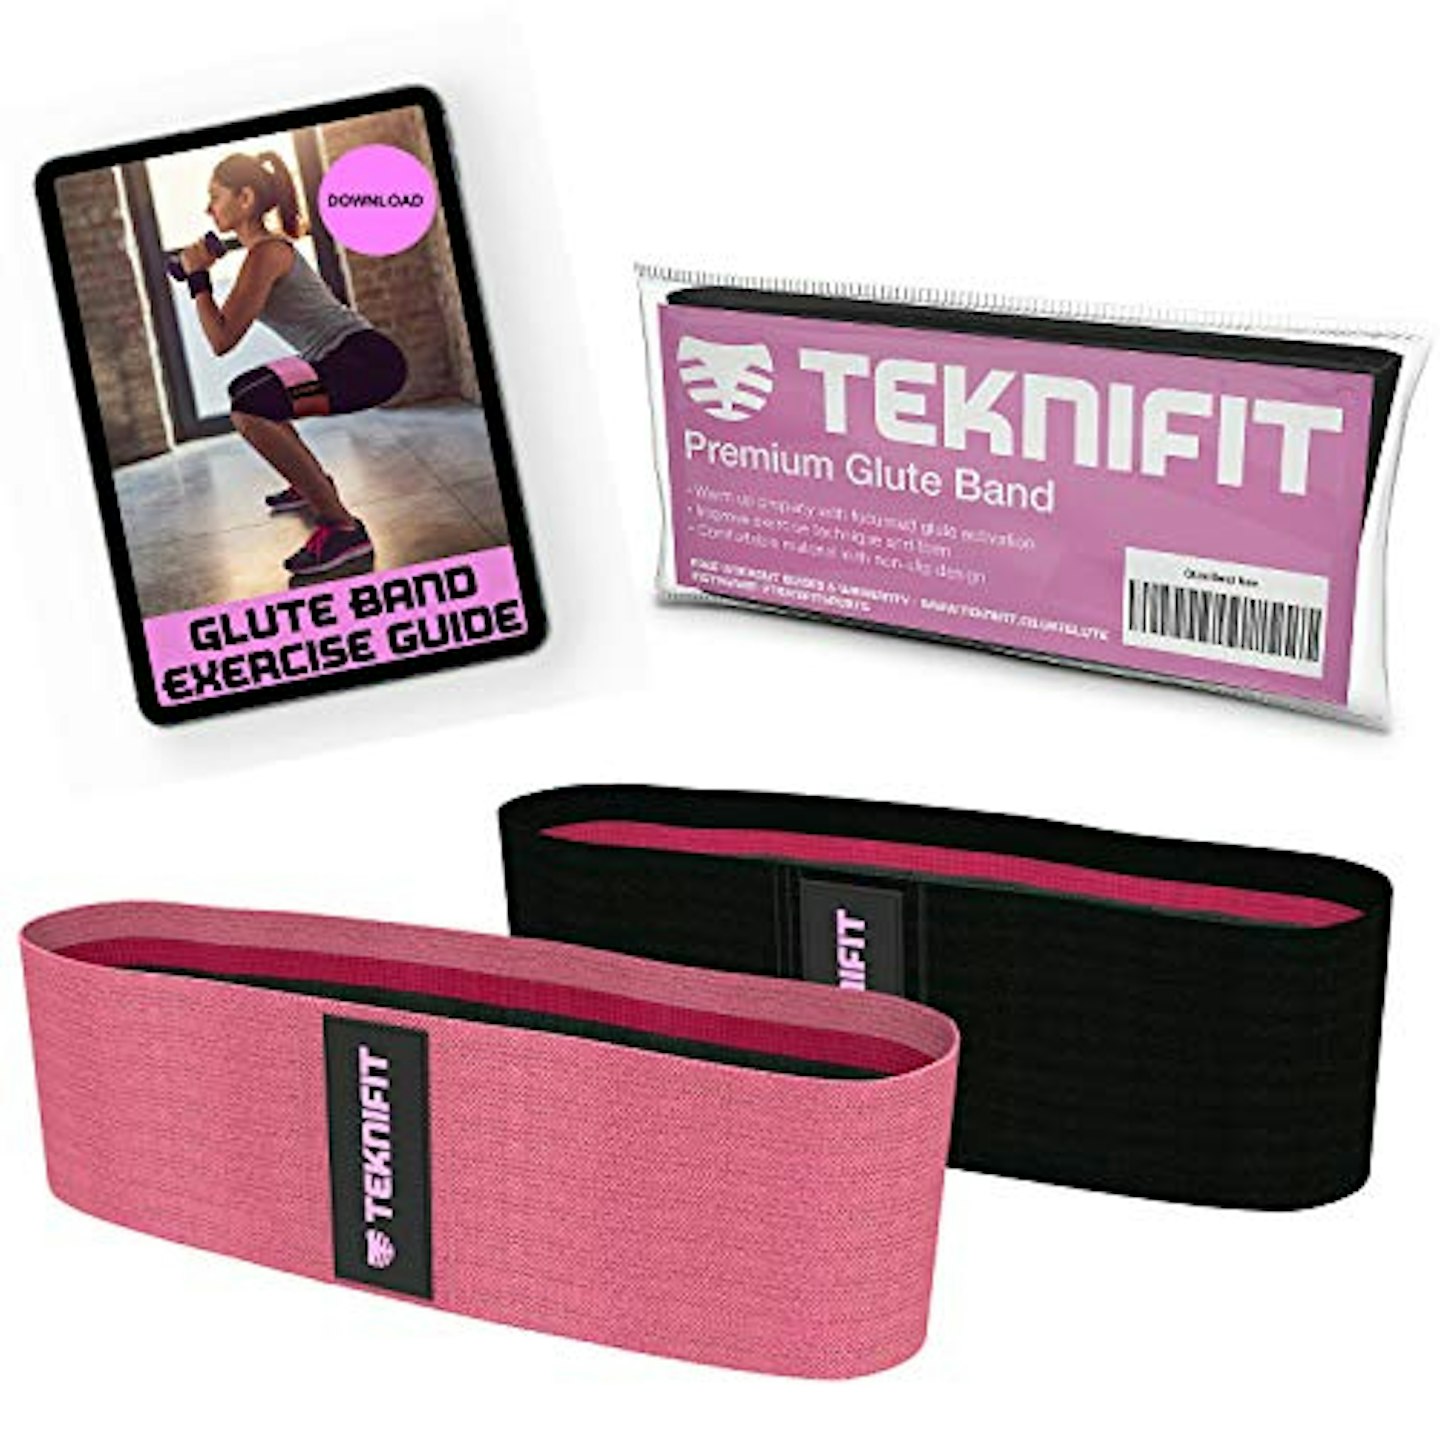 Teknifit glute band